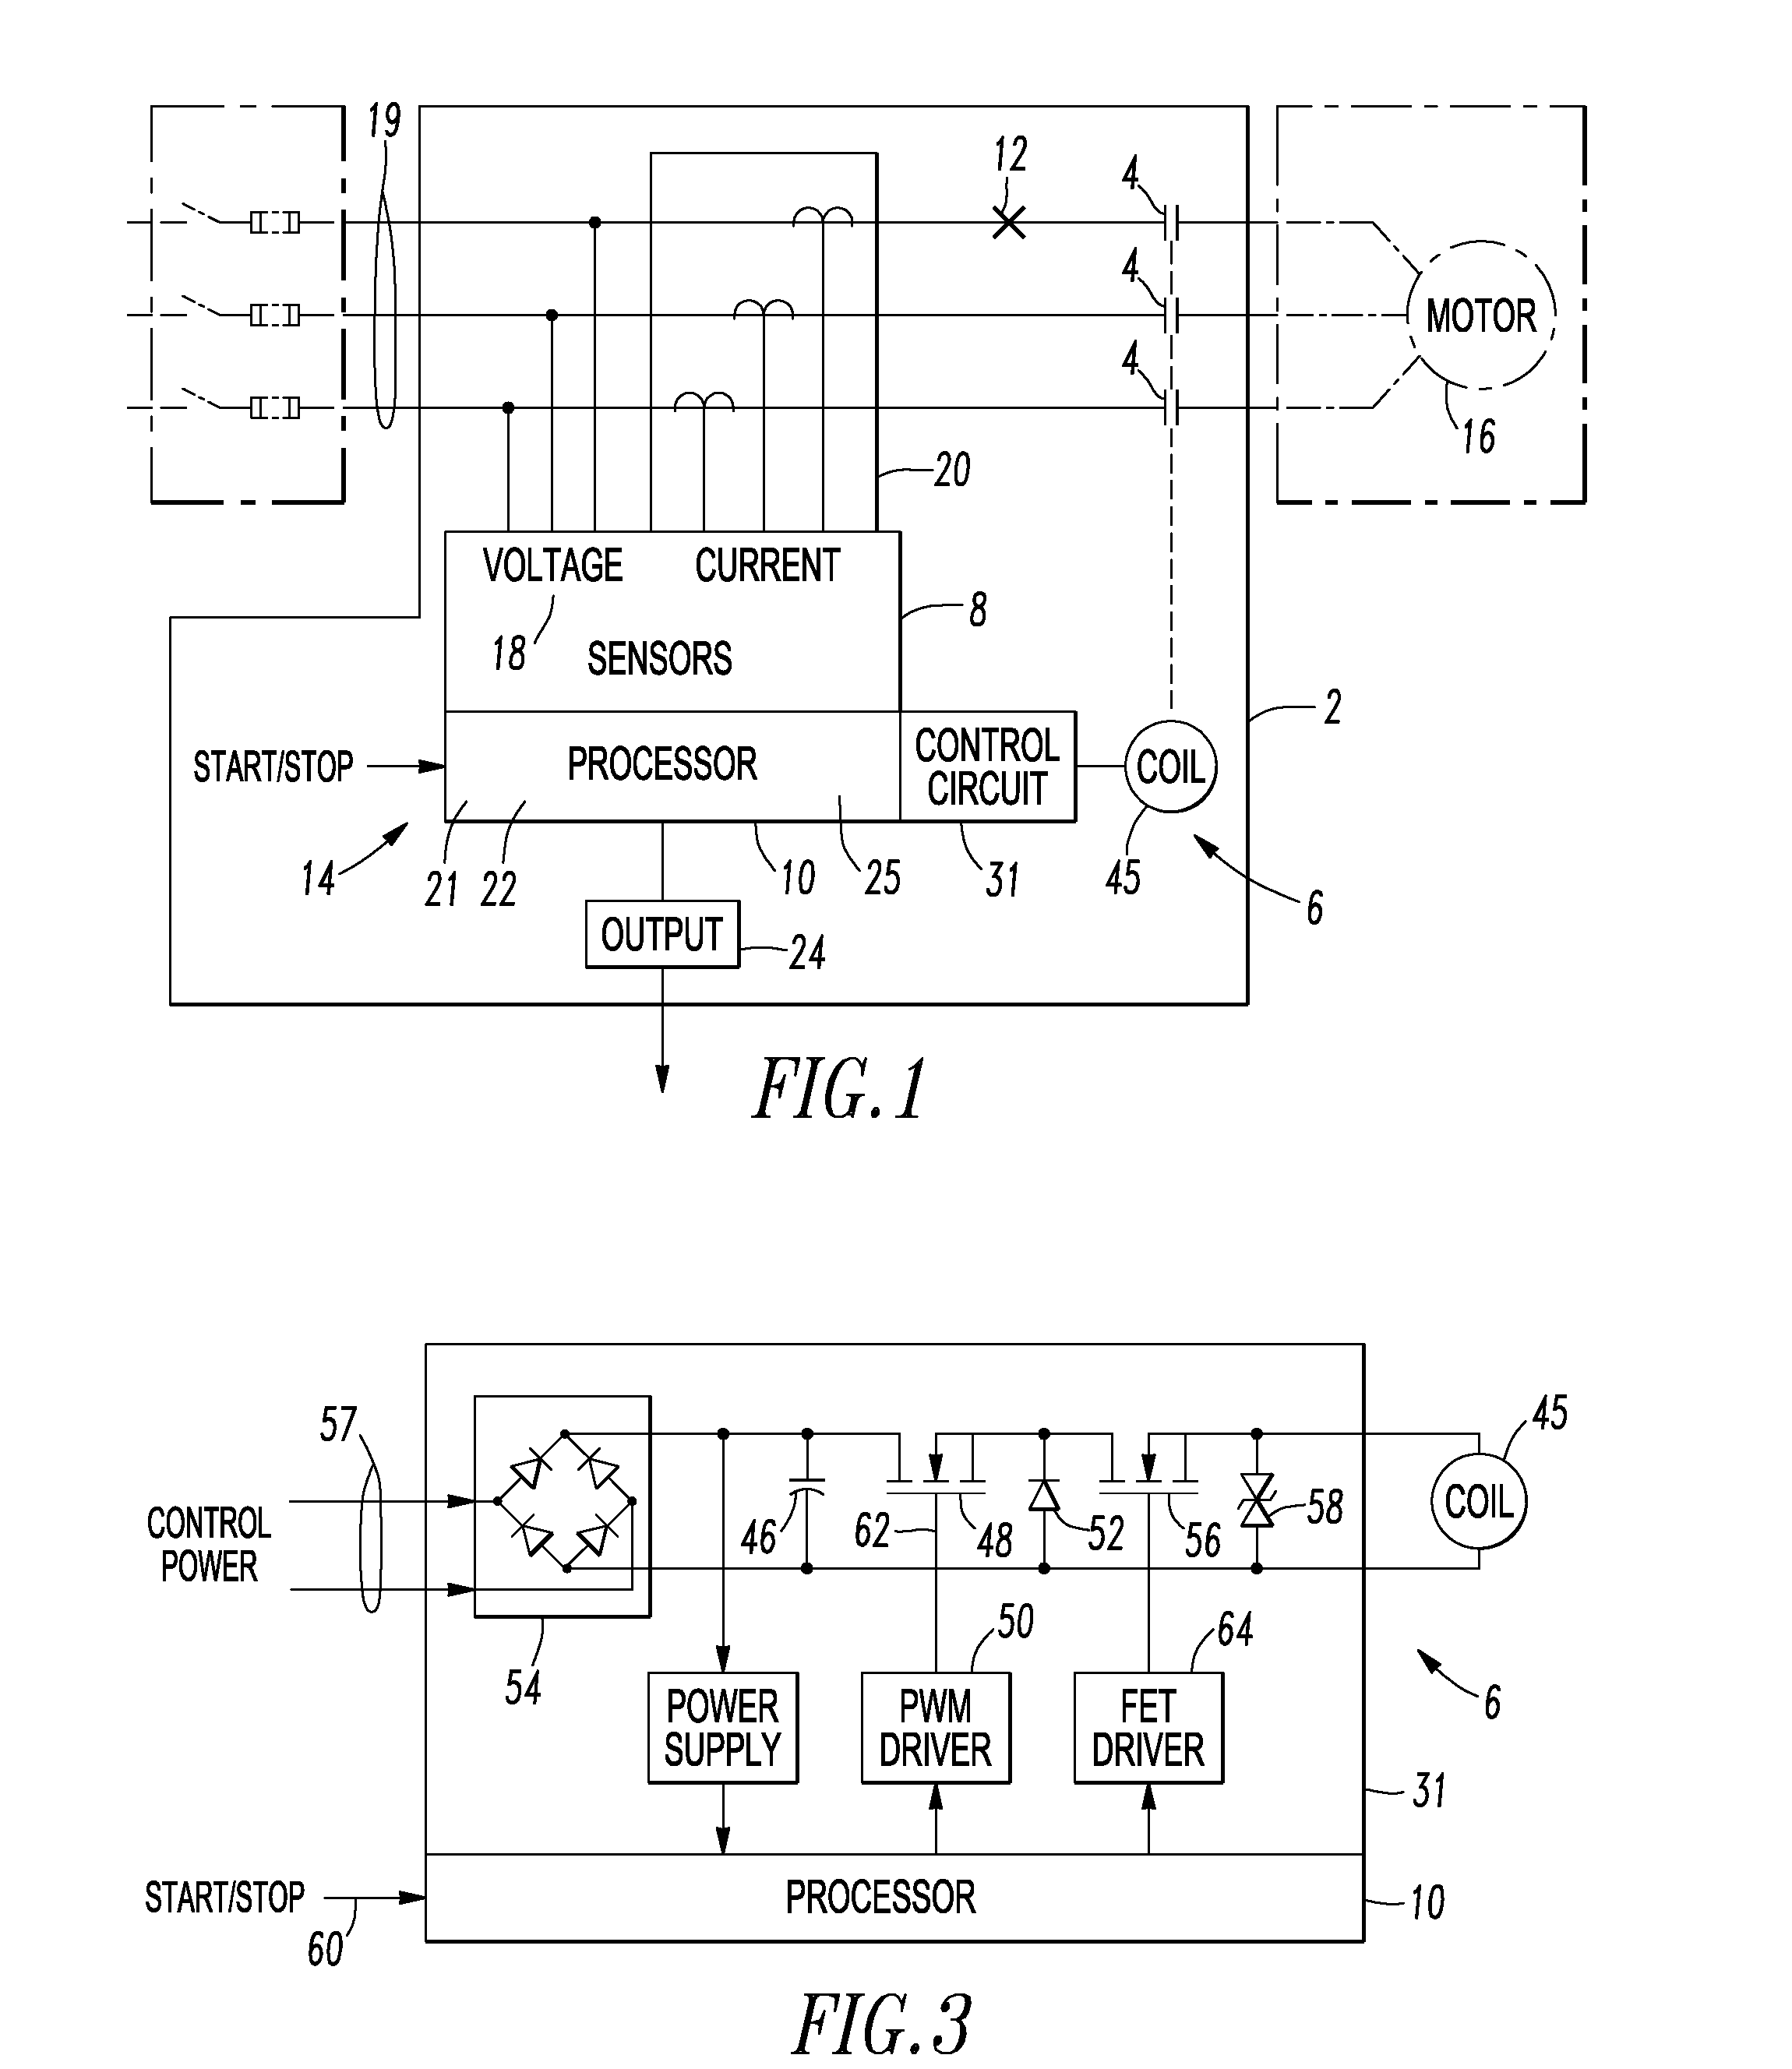 Protection relay, electrical switching apparatus, and system including a number of controllers for determining and outputting fault current available at a load and incident energy or personal protective equipment level operatively associated therewith